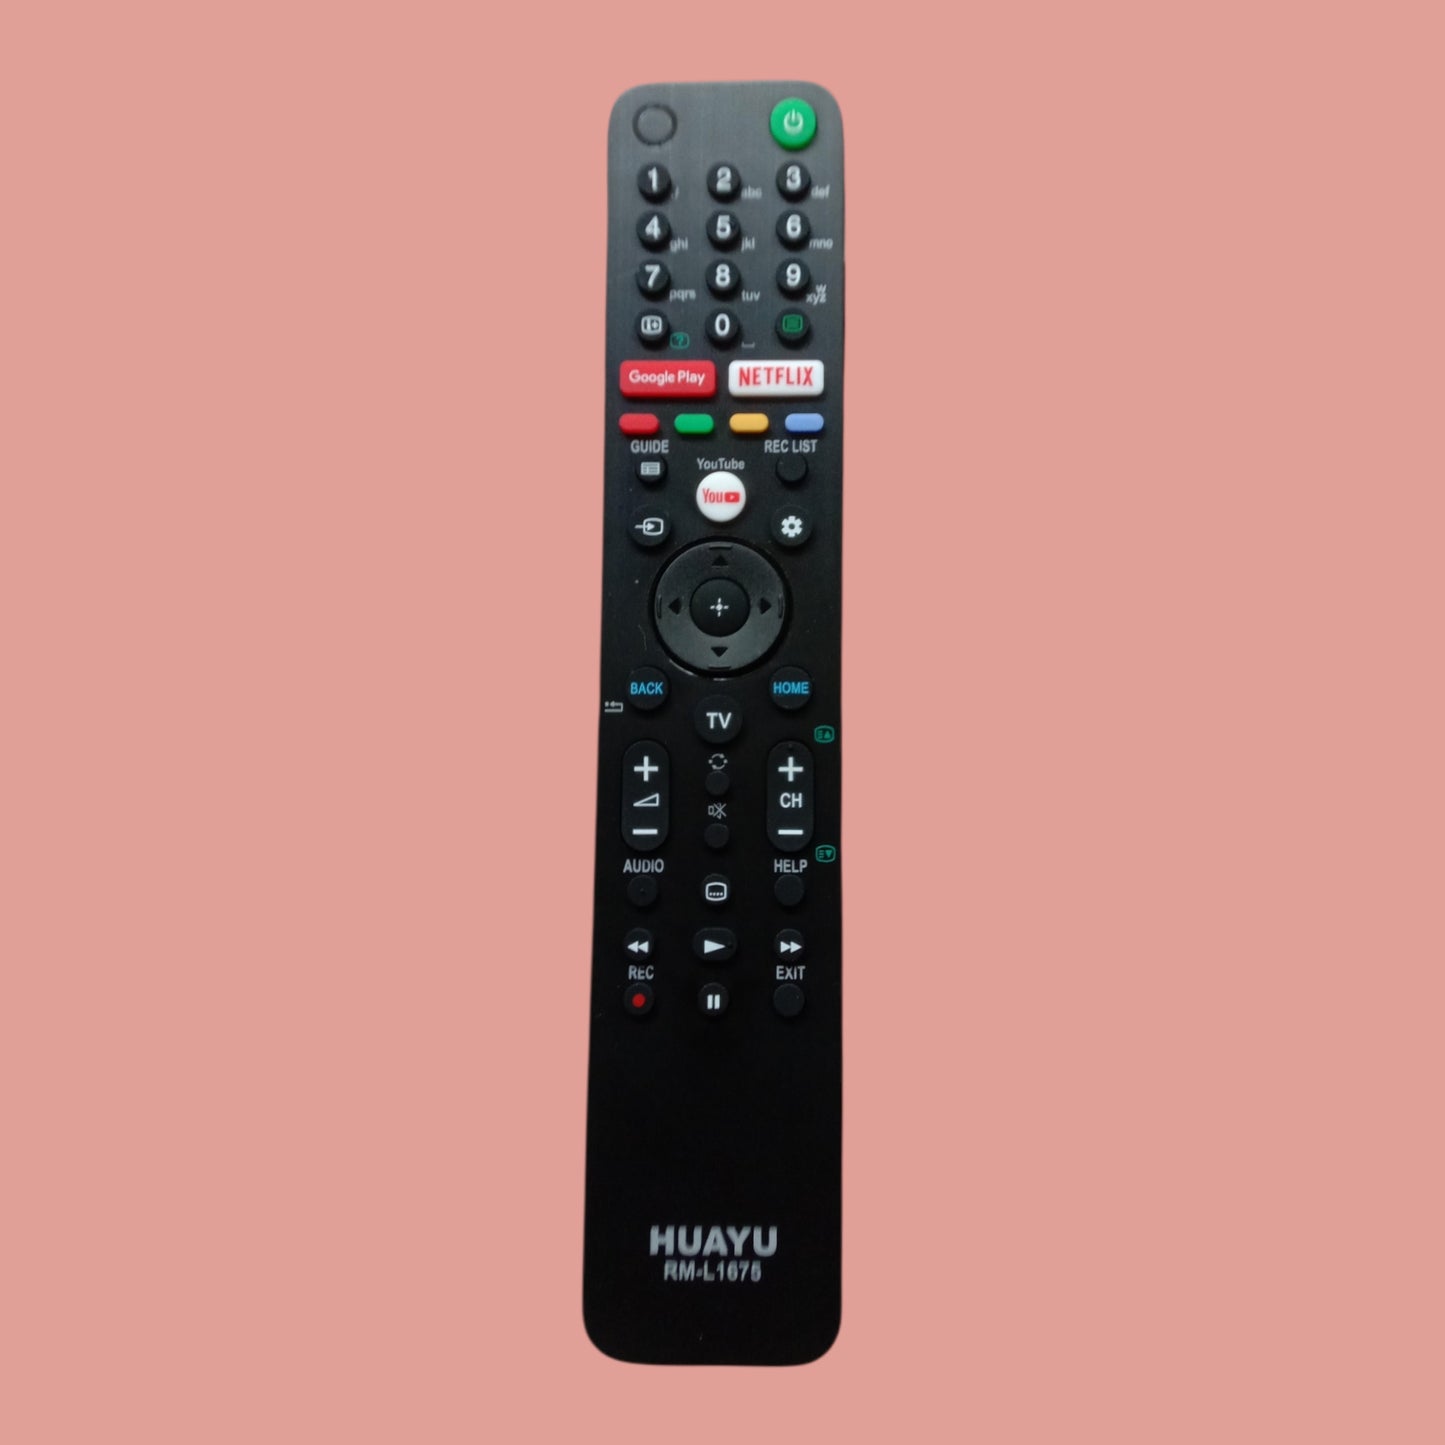 Sony Smart TV remote control with Googleplay and Youtube and Netflix - Faritha